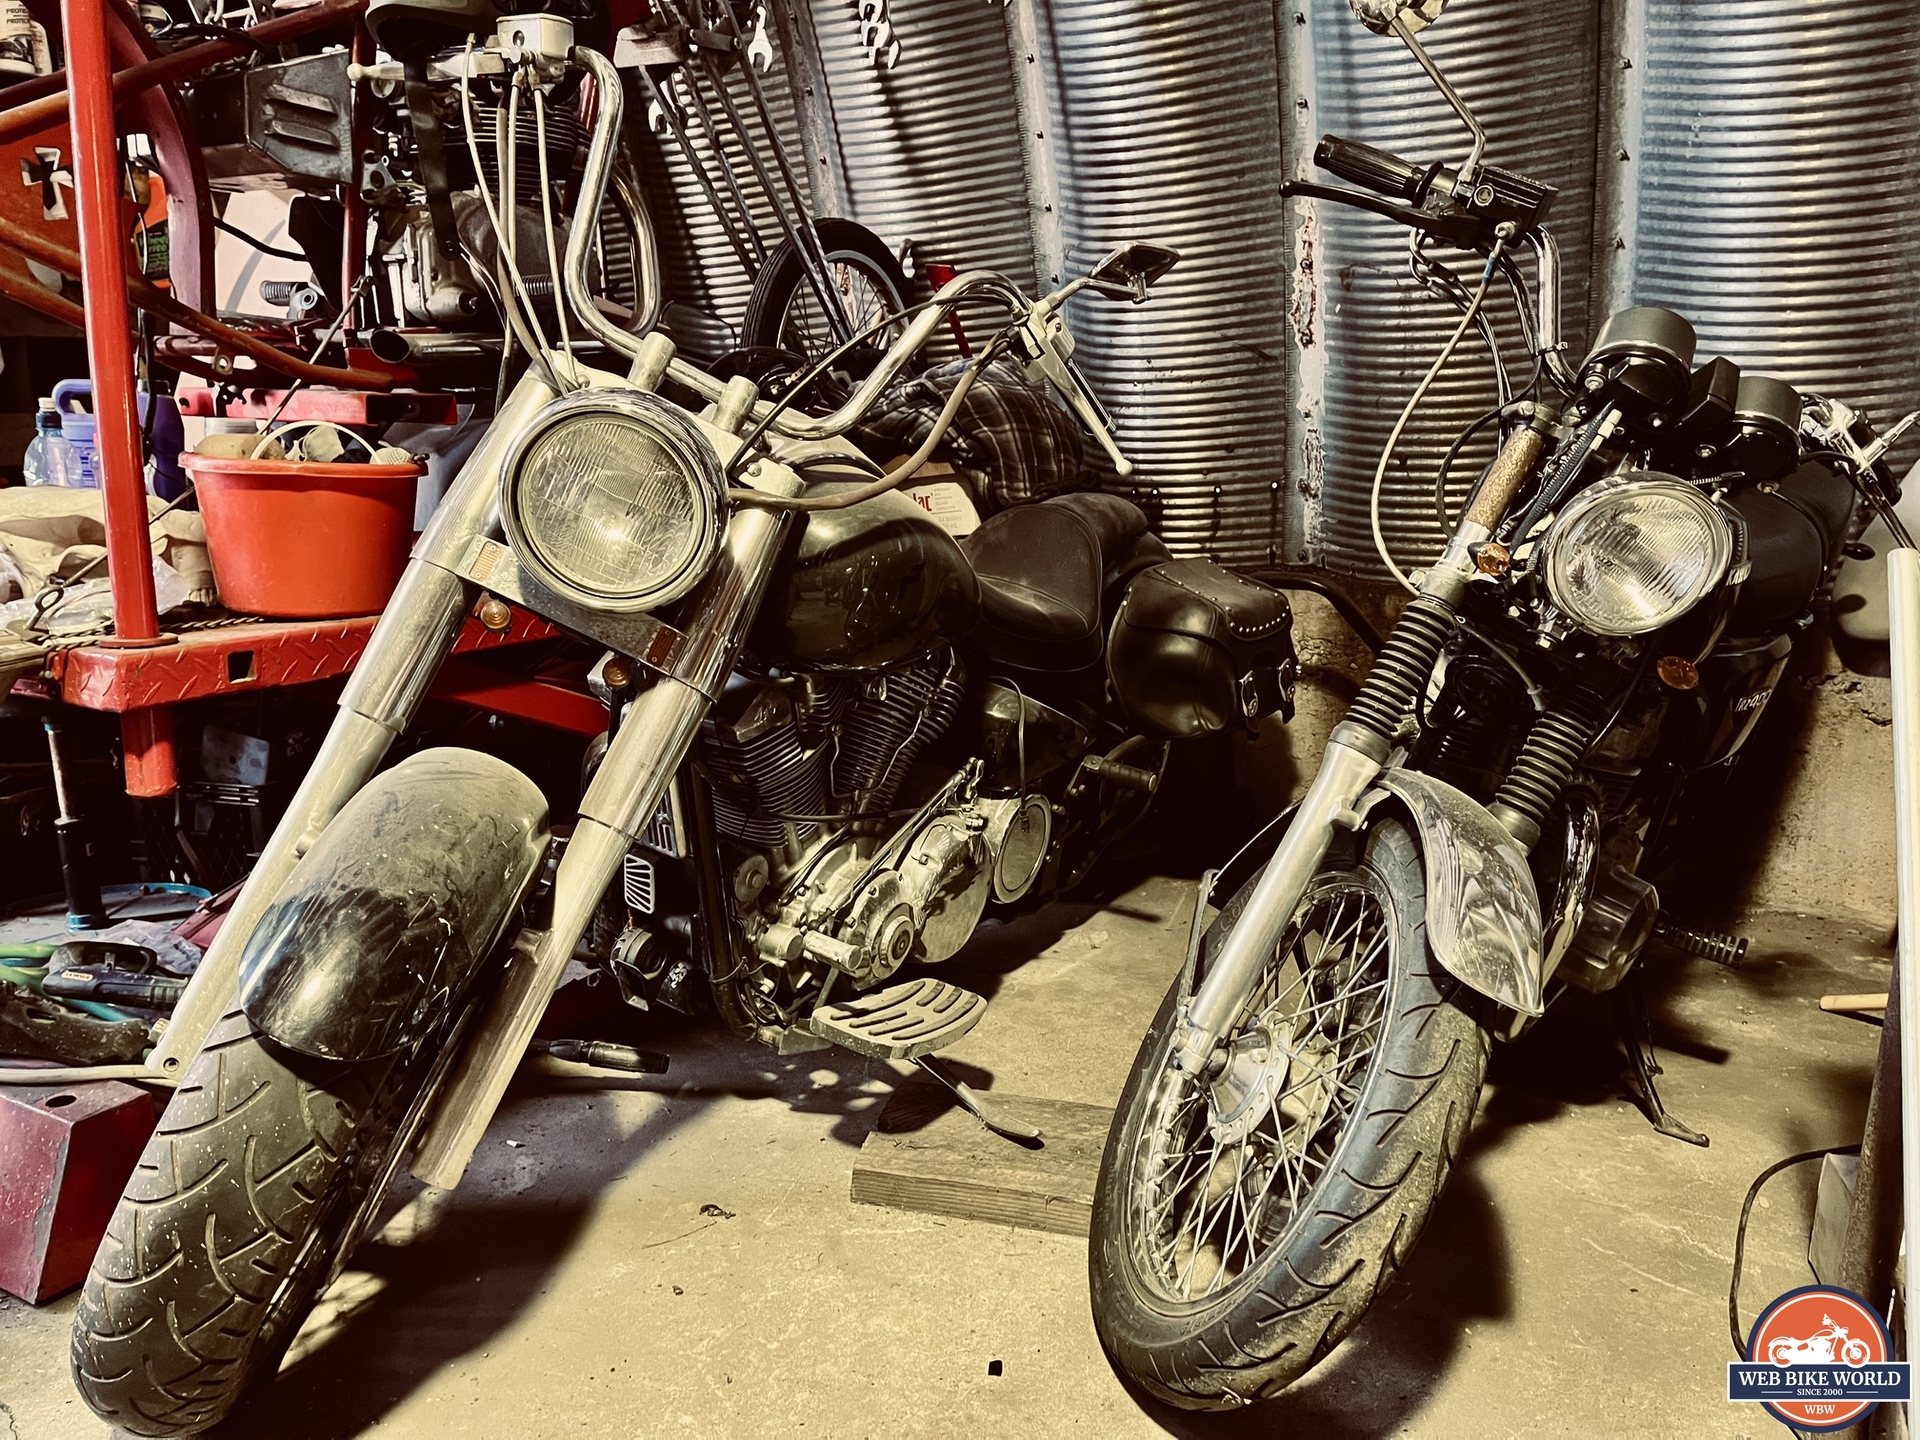 Two of Grant’s custom bikes including a Yamaha Road Star 1600 used for one of the Predator films